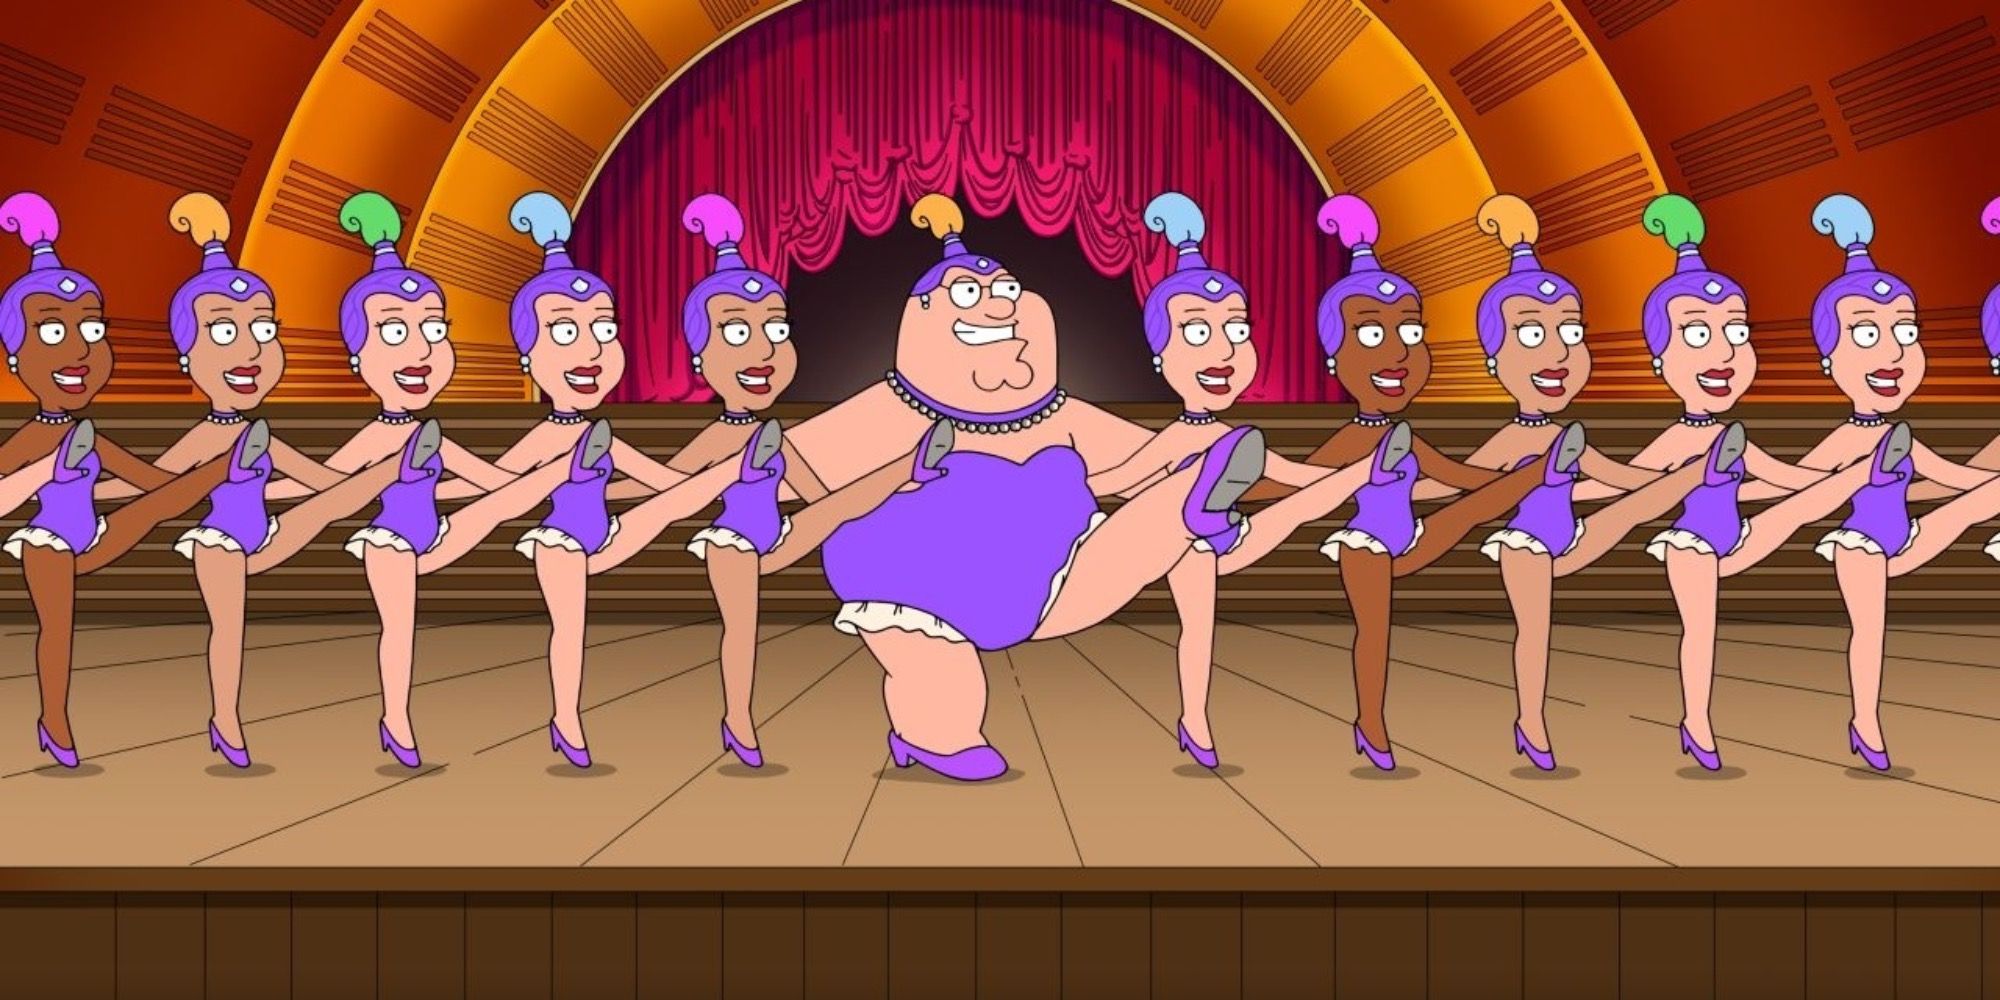 Peter in feminine clothing, dancing in a line with dancers